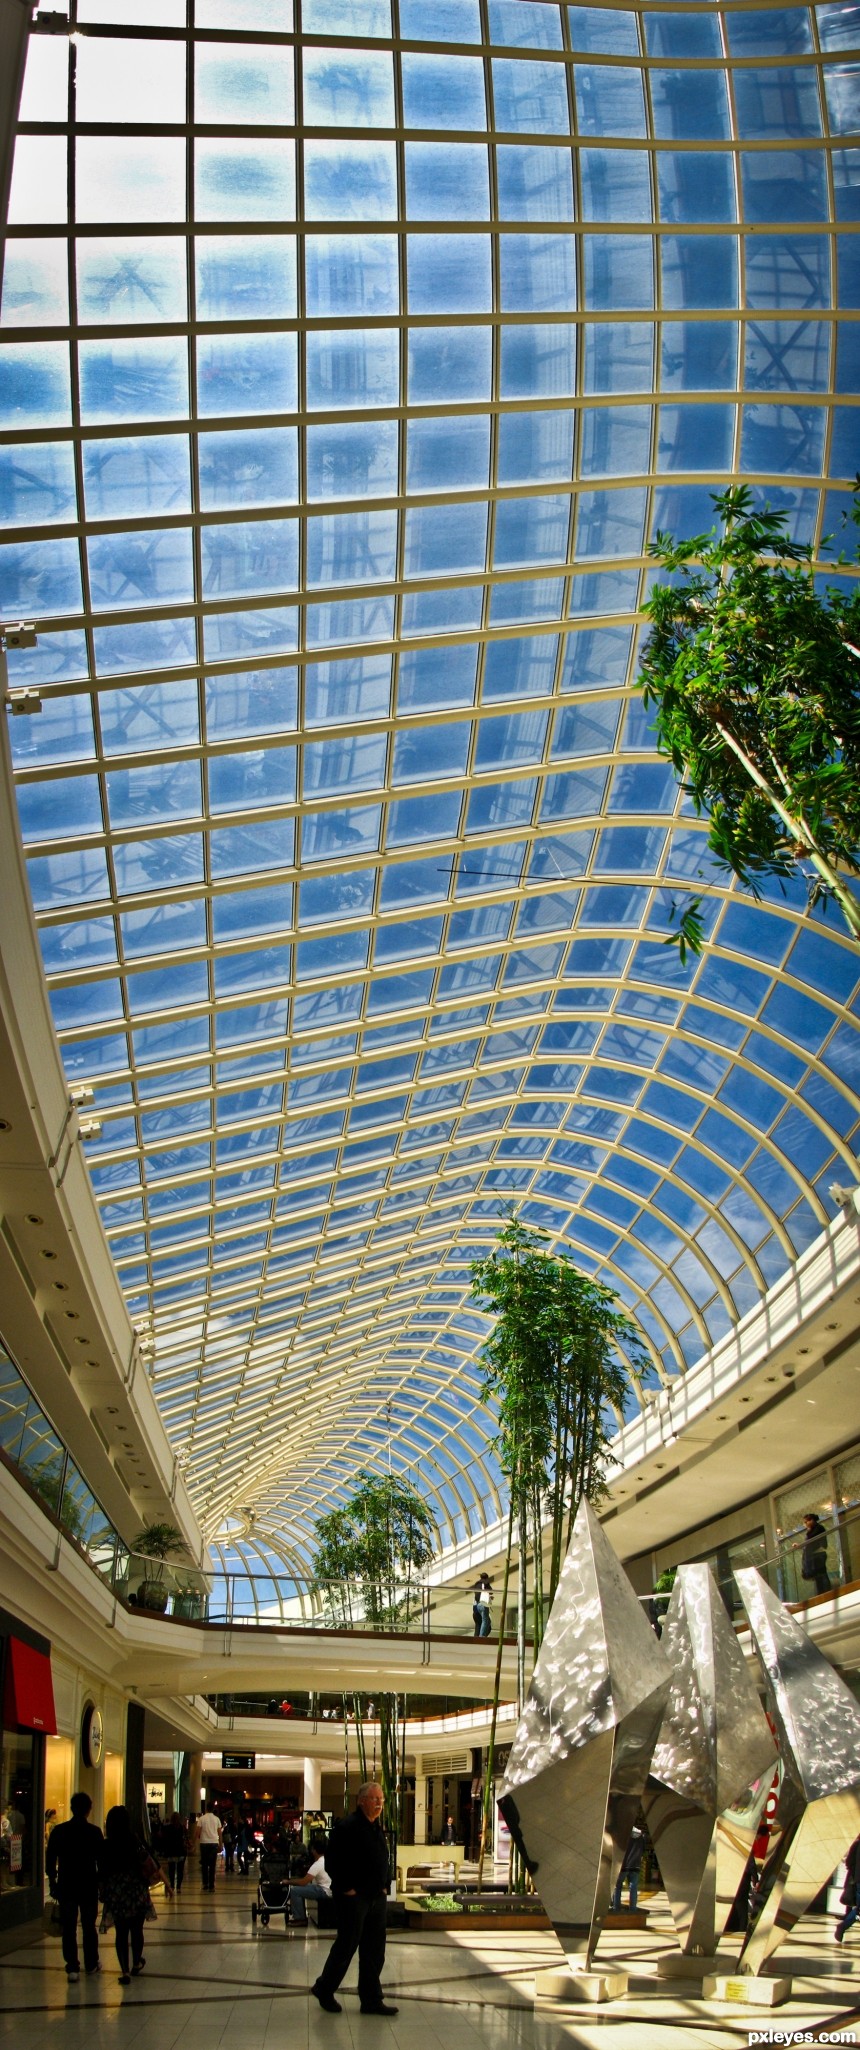 Chadstone Shopping Centre photoshop picture)